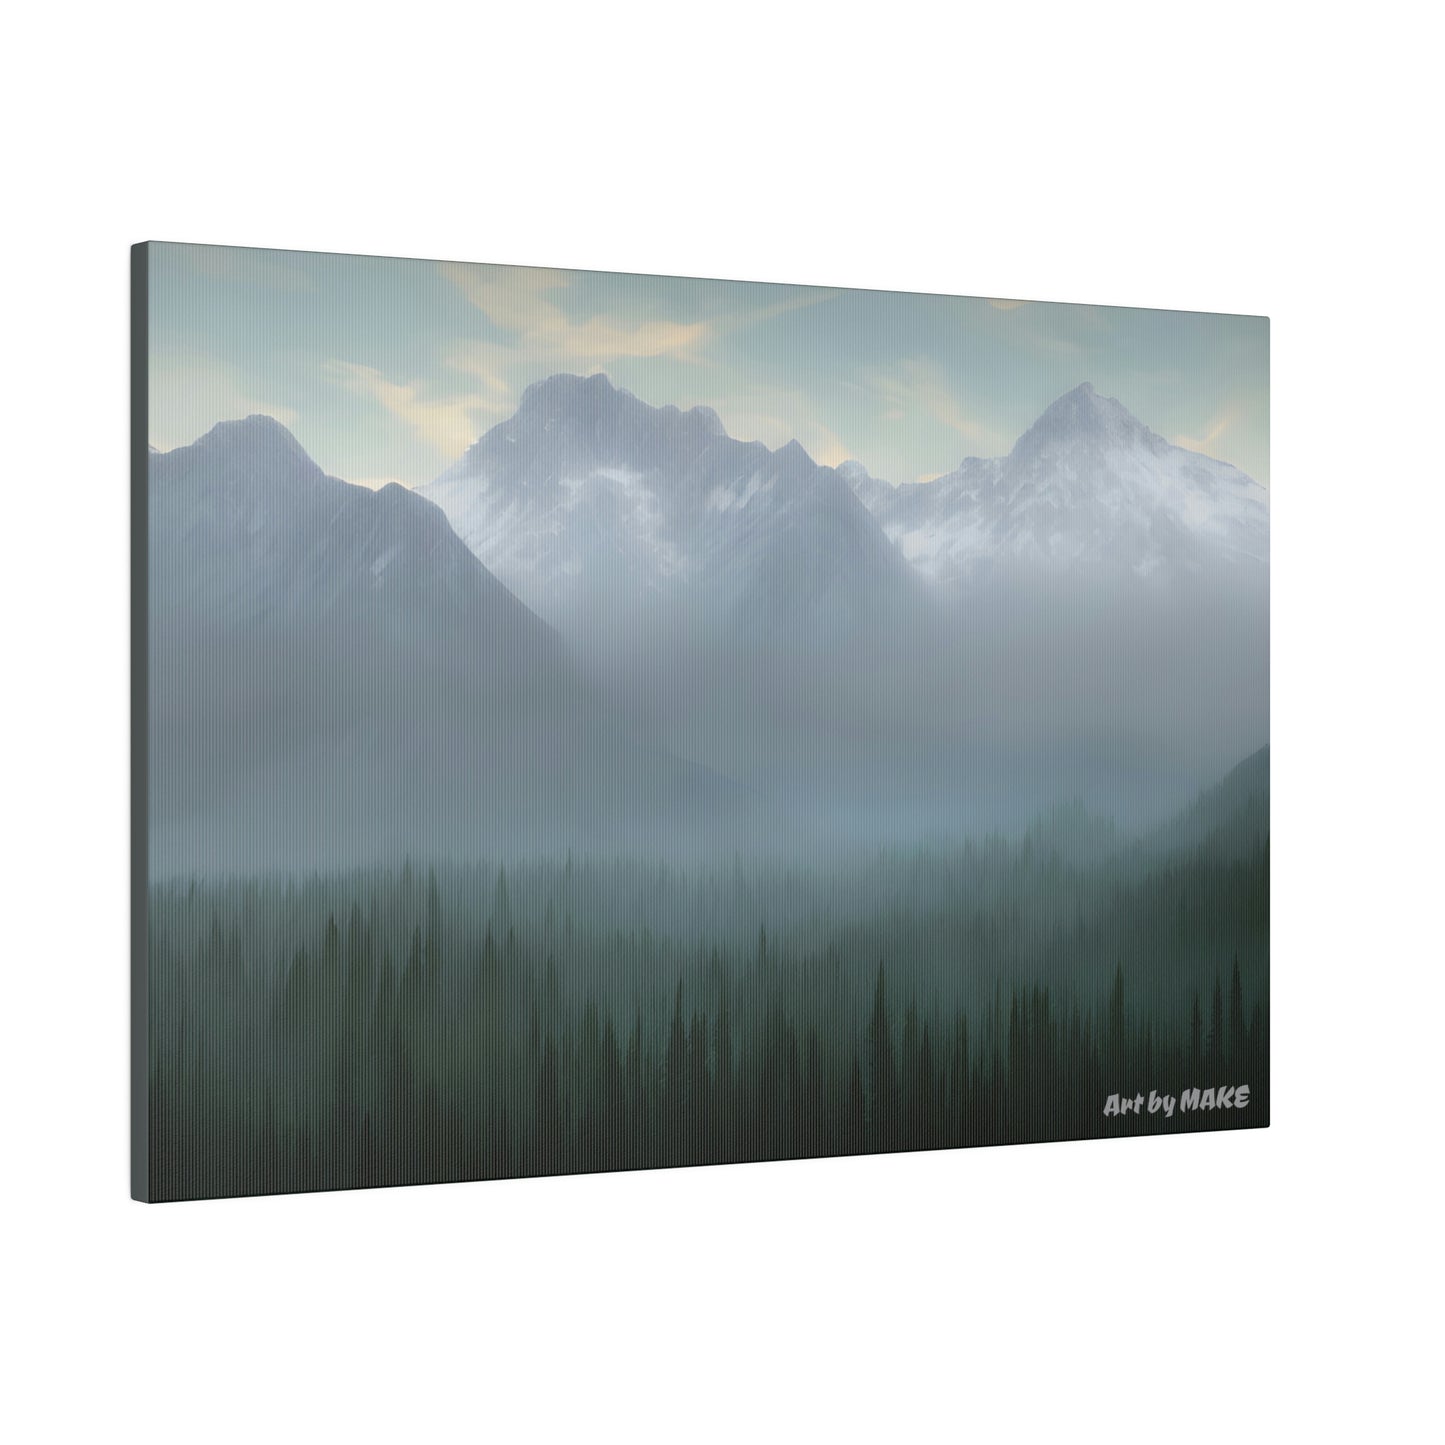 American Mountains 3 - 24"x16" Matte Canvas, Stretched, 0.75"